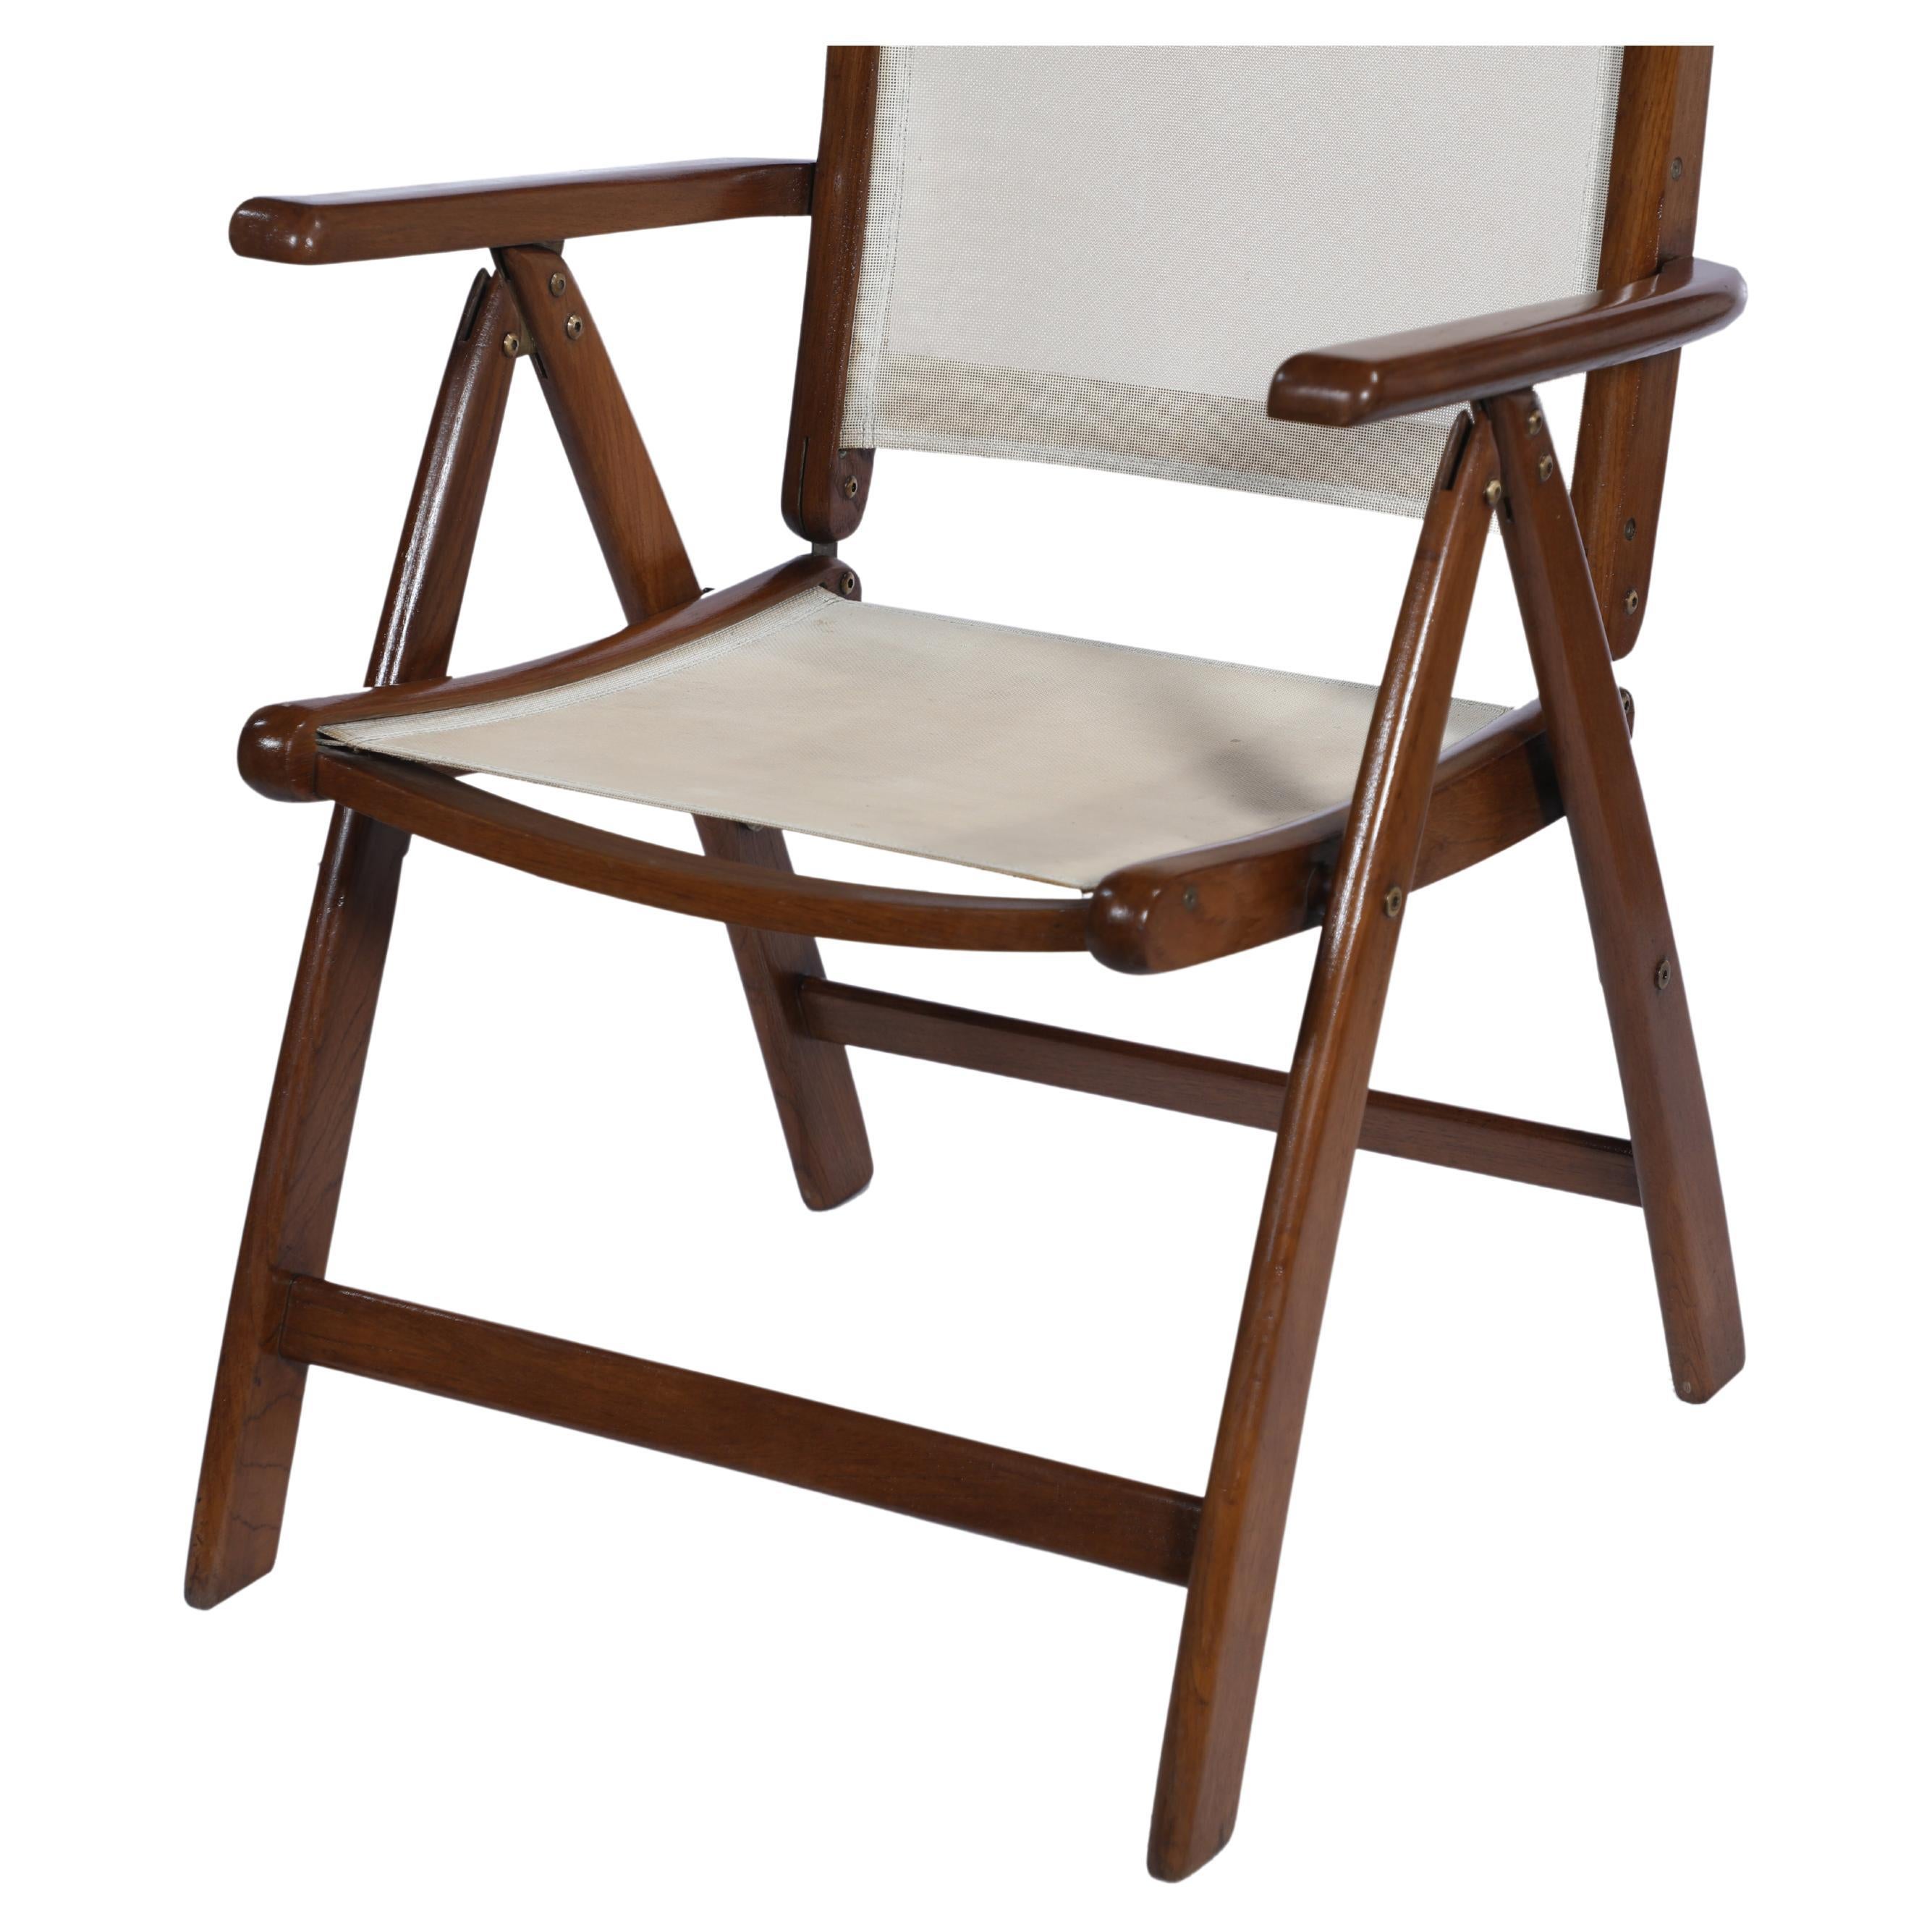 A folding and adjustable teak patio or side chair with an open mesh seat. Easy to add a seat cushion if so desired, originally designed for tropical climates as the open mesh seat would cool the body. Colonial British. 1960s.